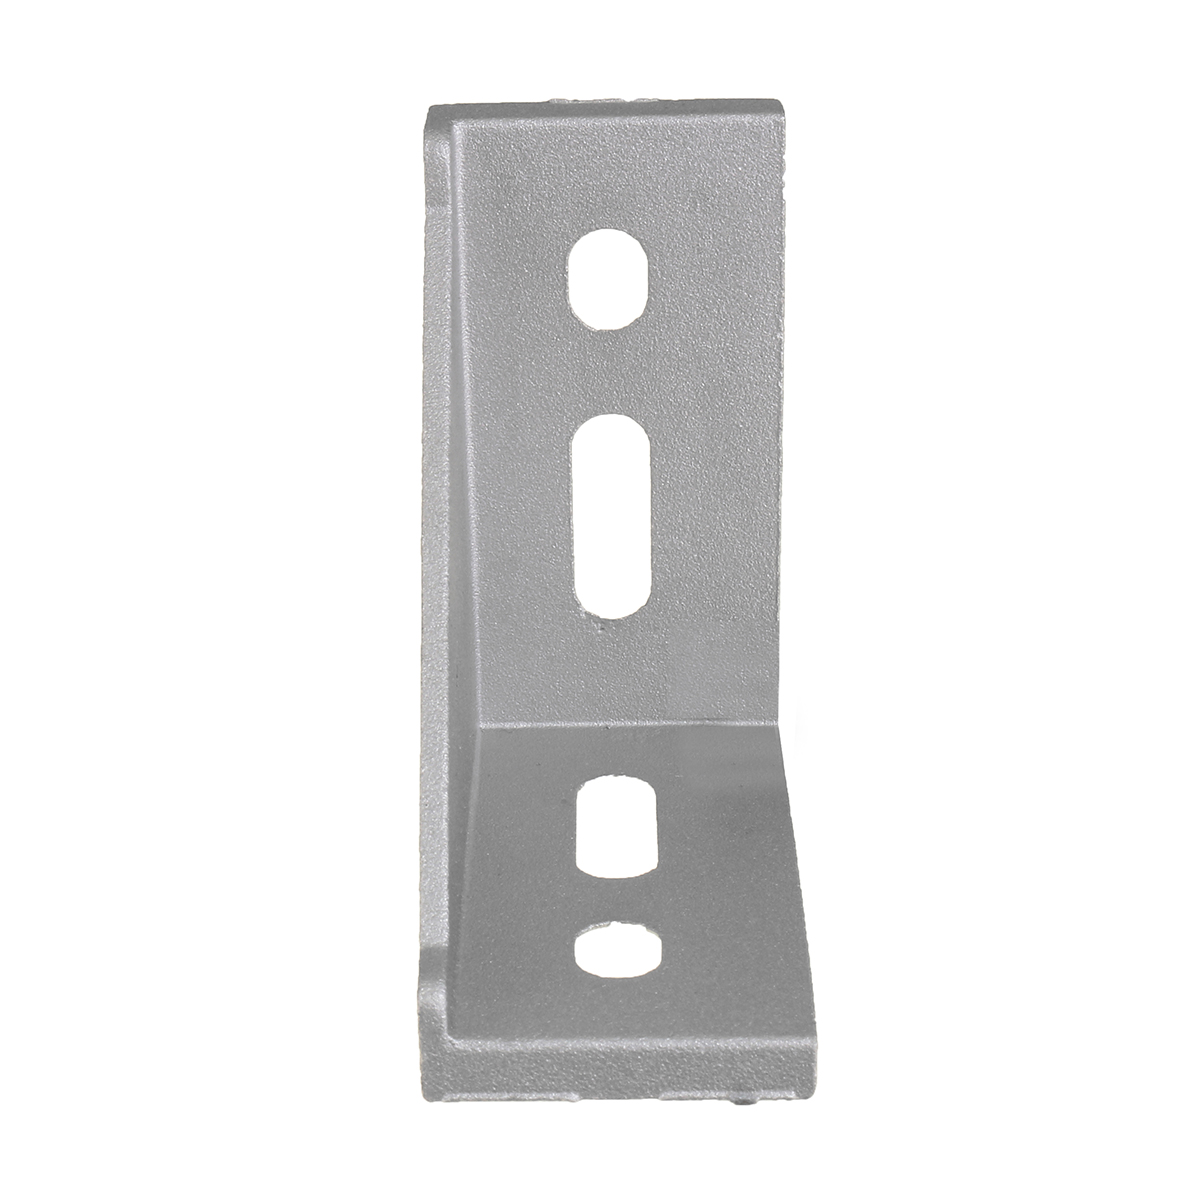 Sulevetrade-AJ30-30times60mm-Aluminum-Angle-Corner-Joint-Connector-Right-Angle-Bracket-Furniture-Fit-1293673